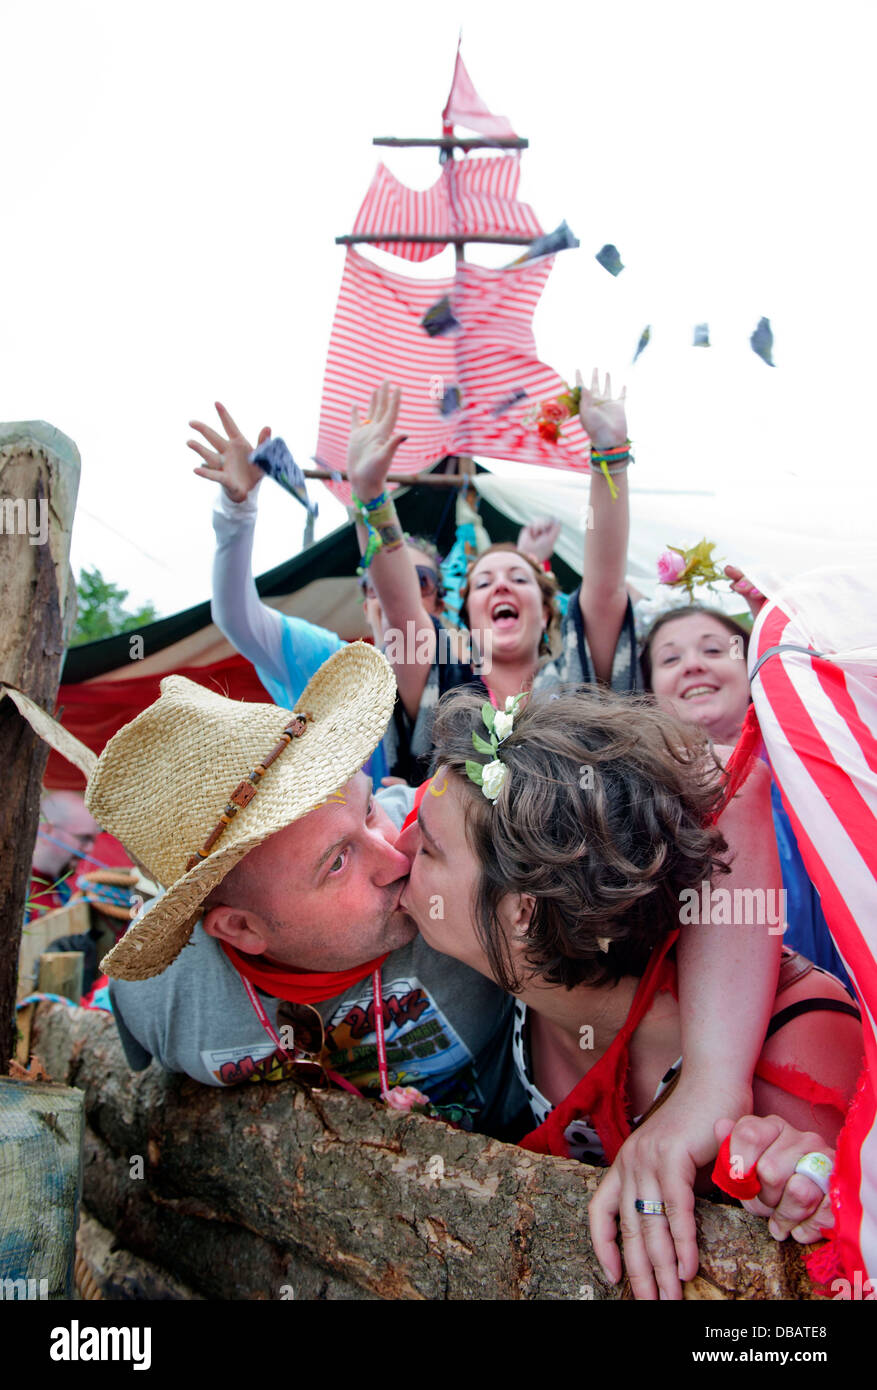 Glastonbury Festival 2013 - Mark and Kate from Staffordshire celebrate their wedding on a marriage ship. Stock Photo